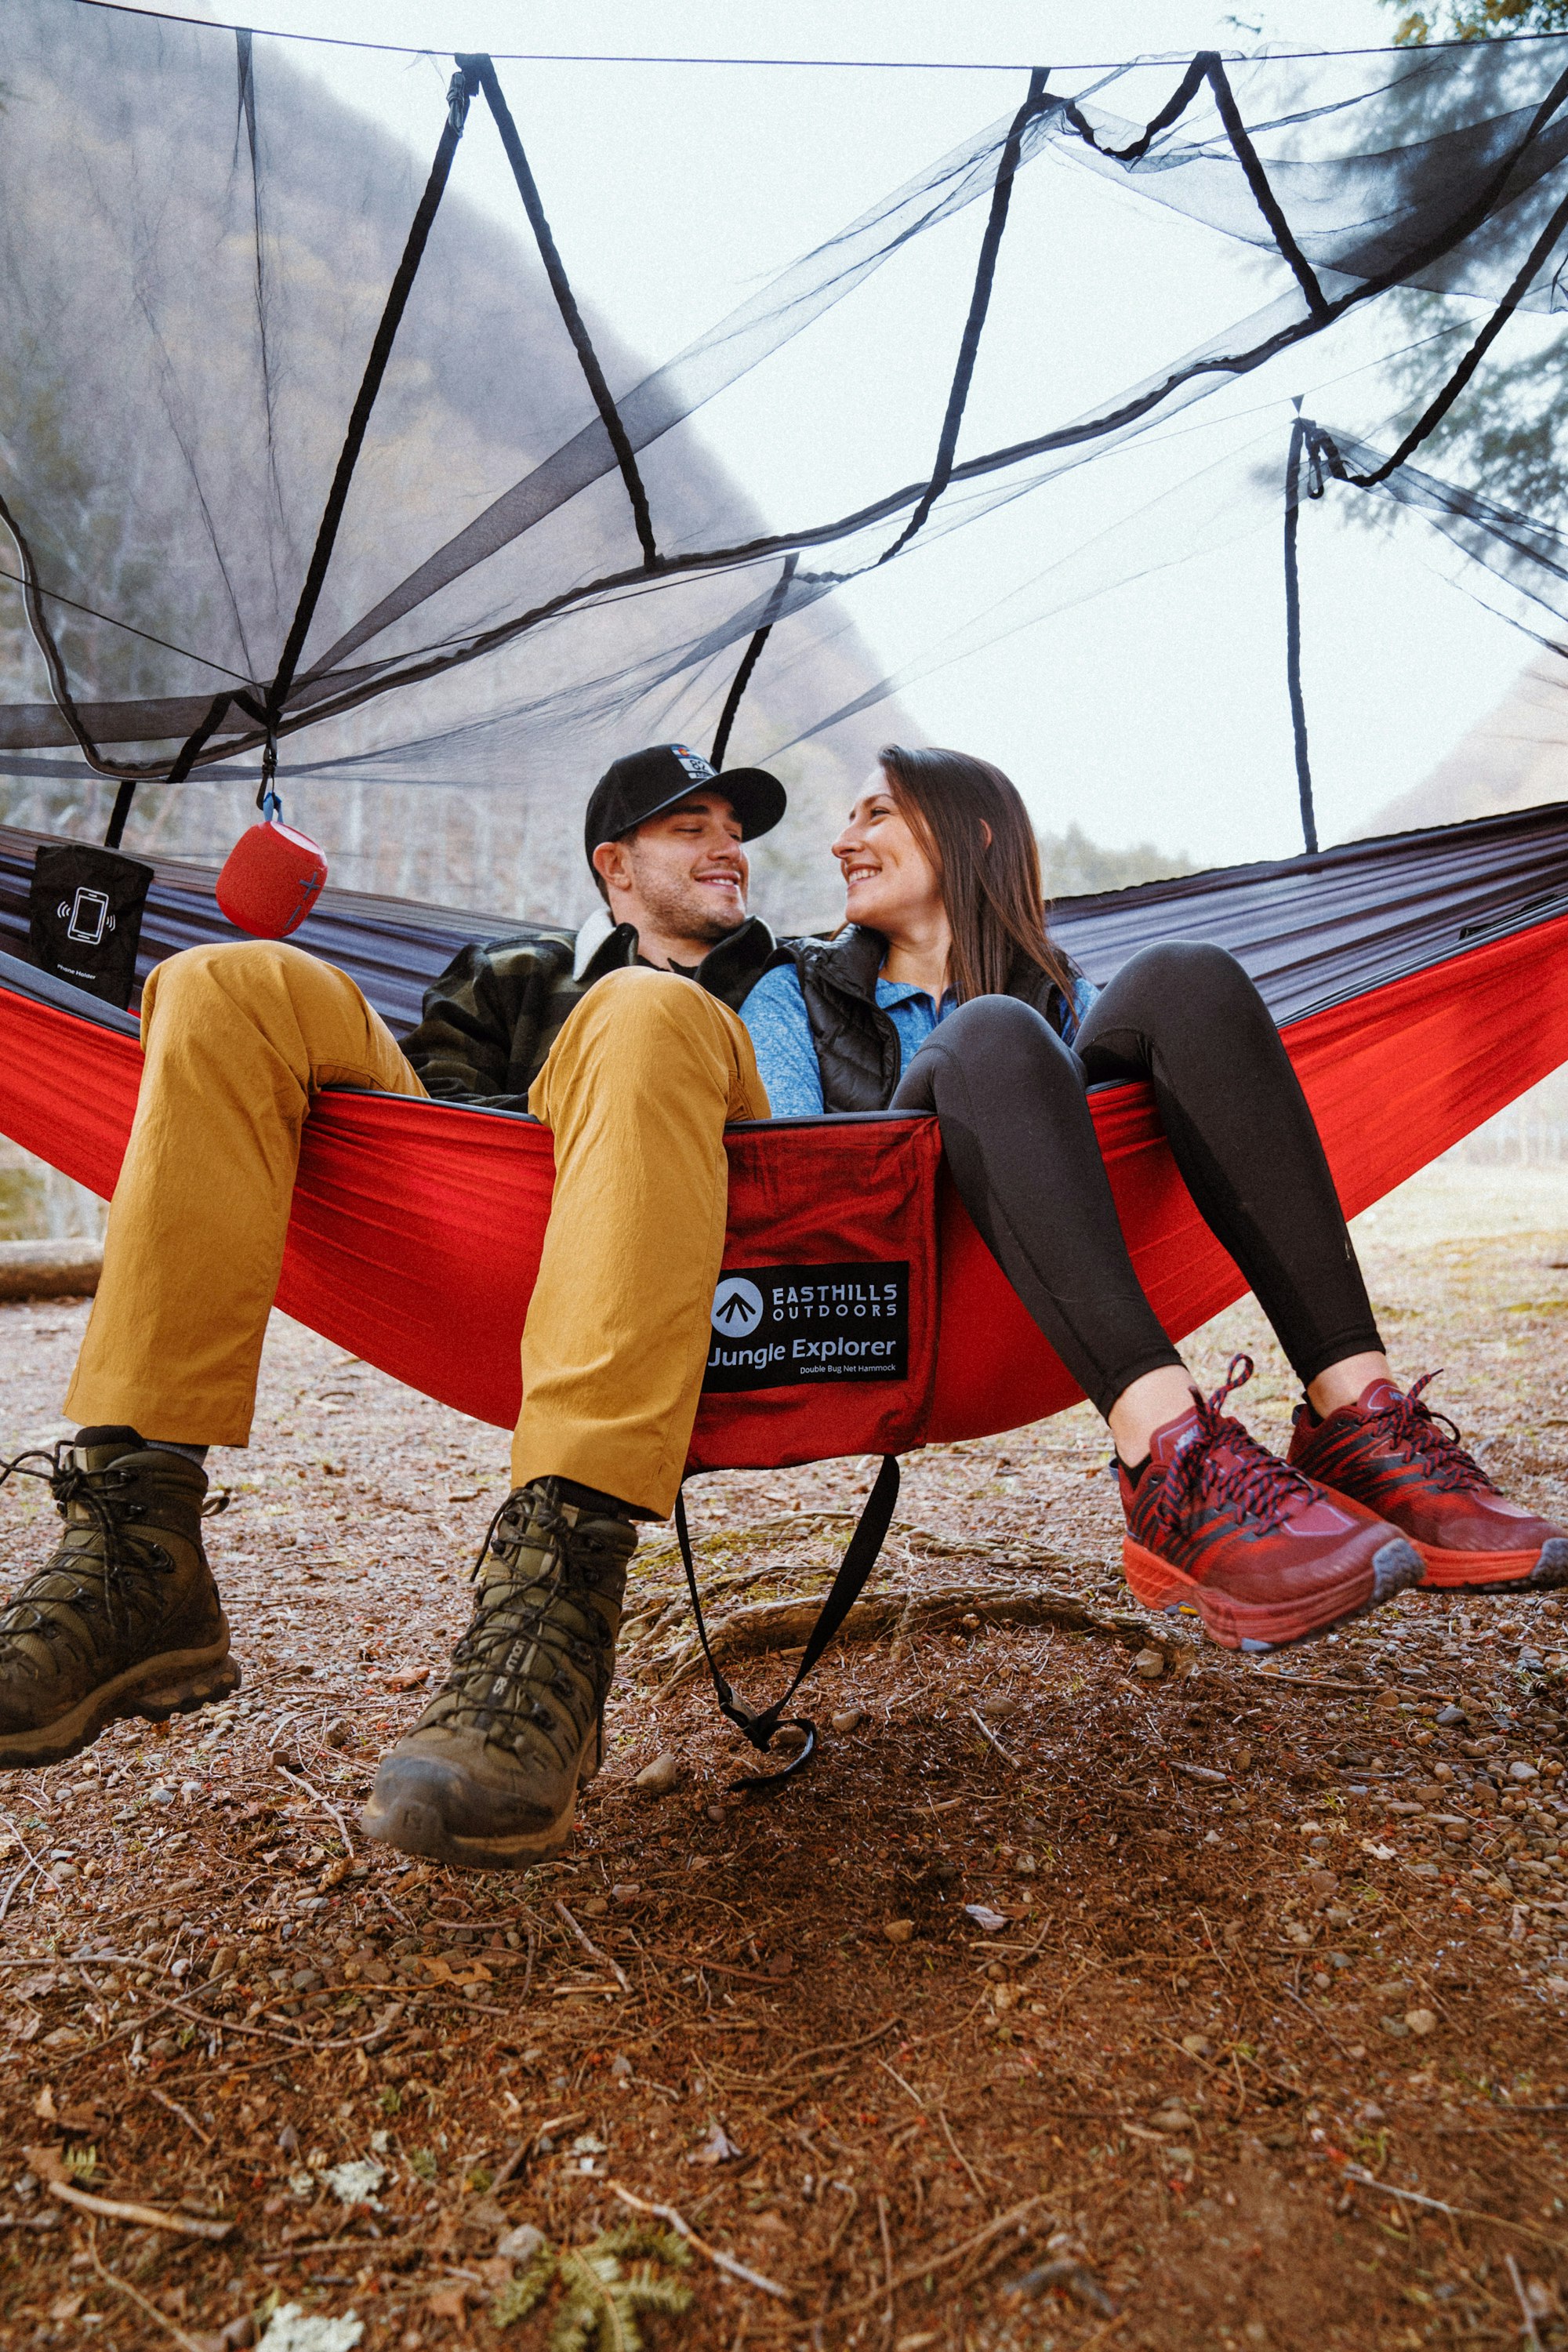 Photo campaign for a hammock company.
Photo by :https://www.instagram.com/justdushawn/
Client : https://www.instagram.com/easthillsoutdoors/


